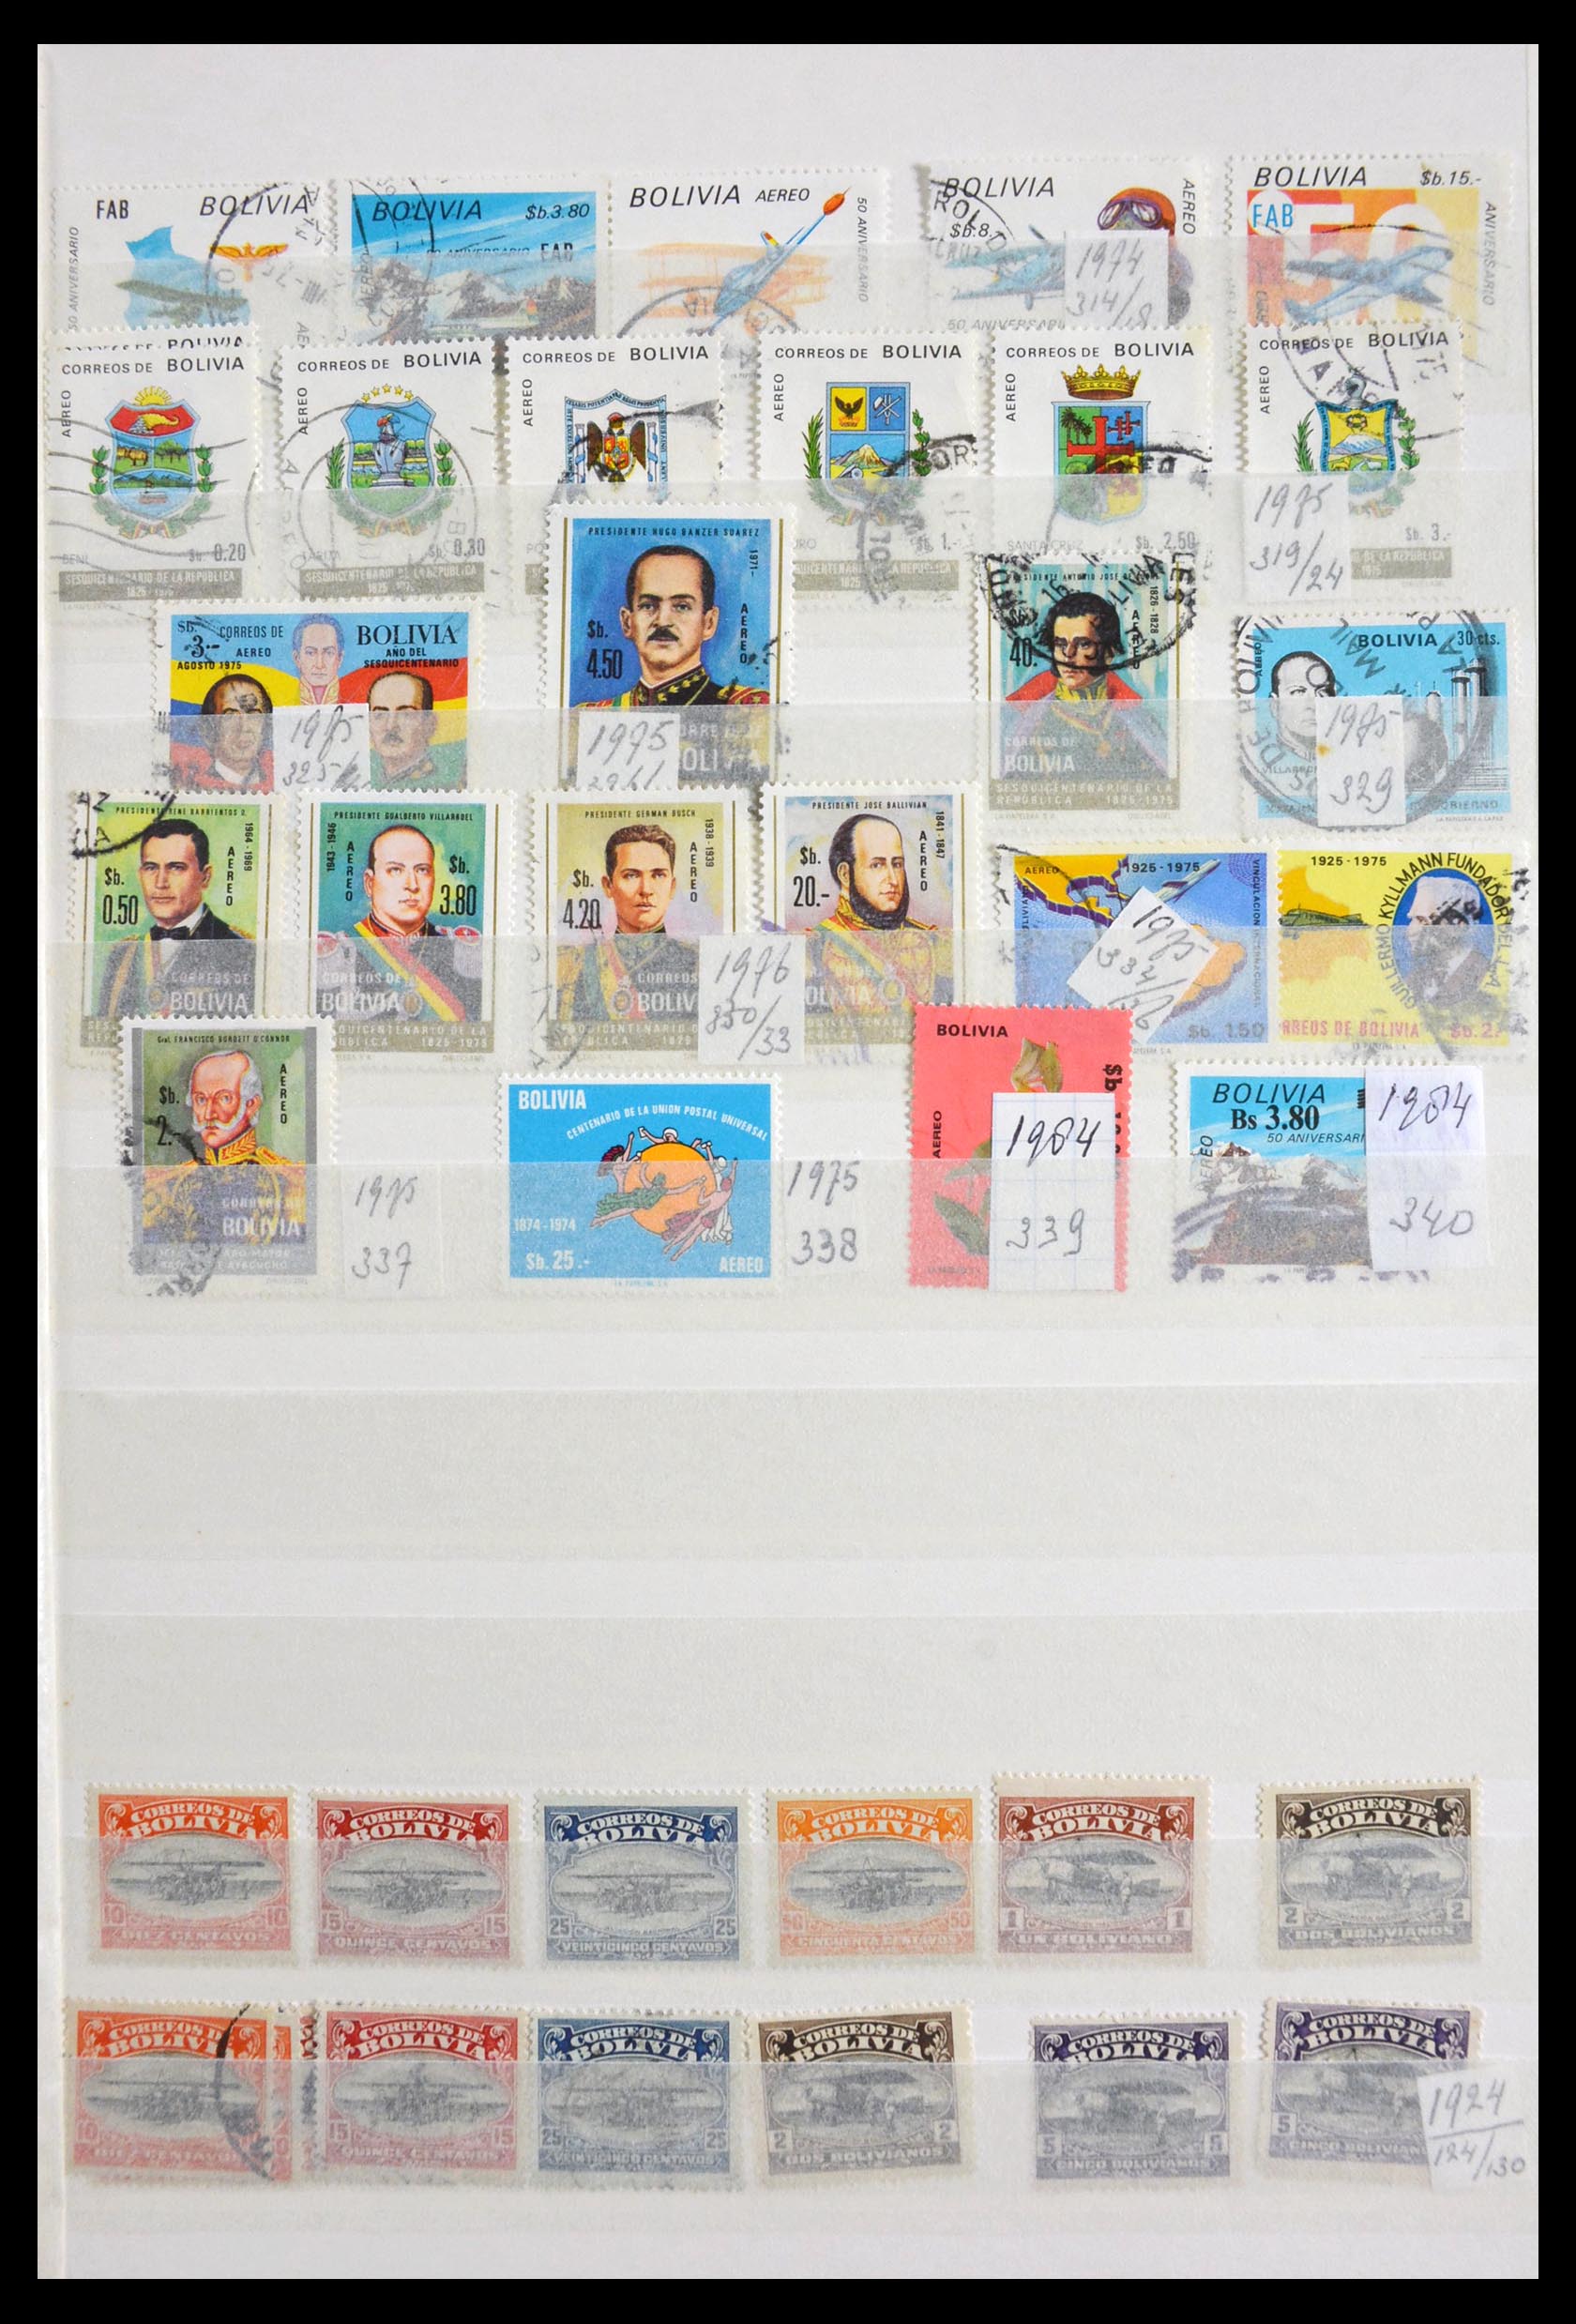 29917 023 - 29917 Latin America airmail stamps.